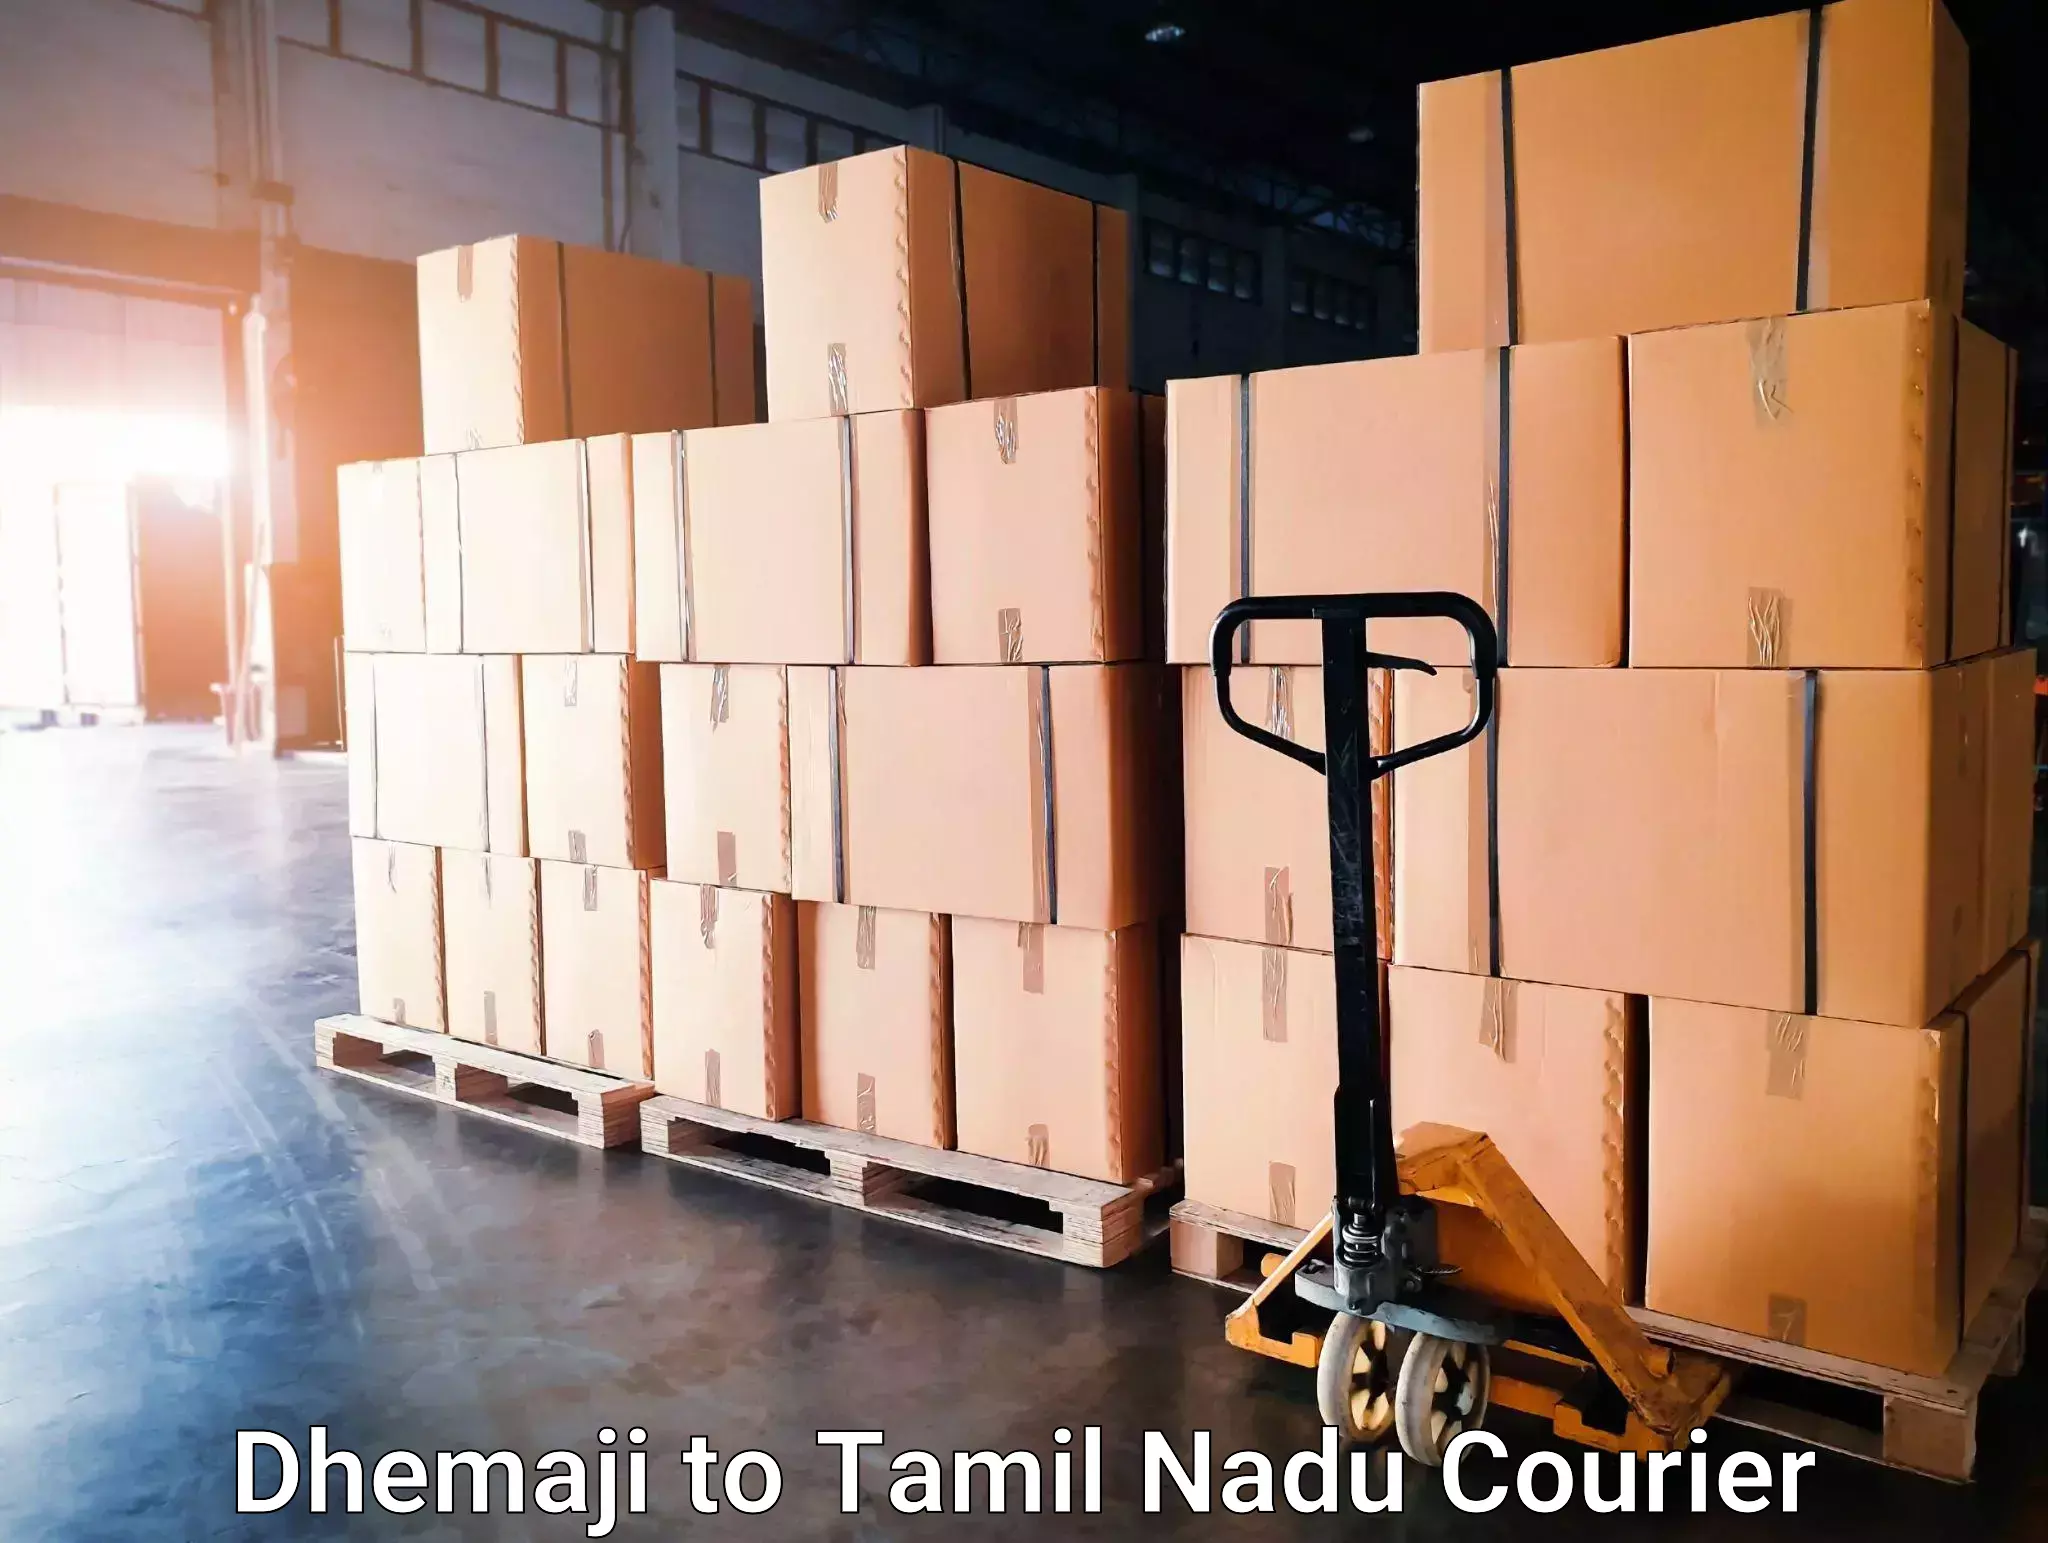 Parcel service for businesses Dhemaji to Nagapattinam